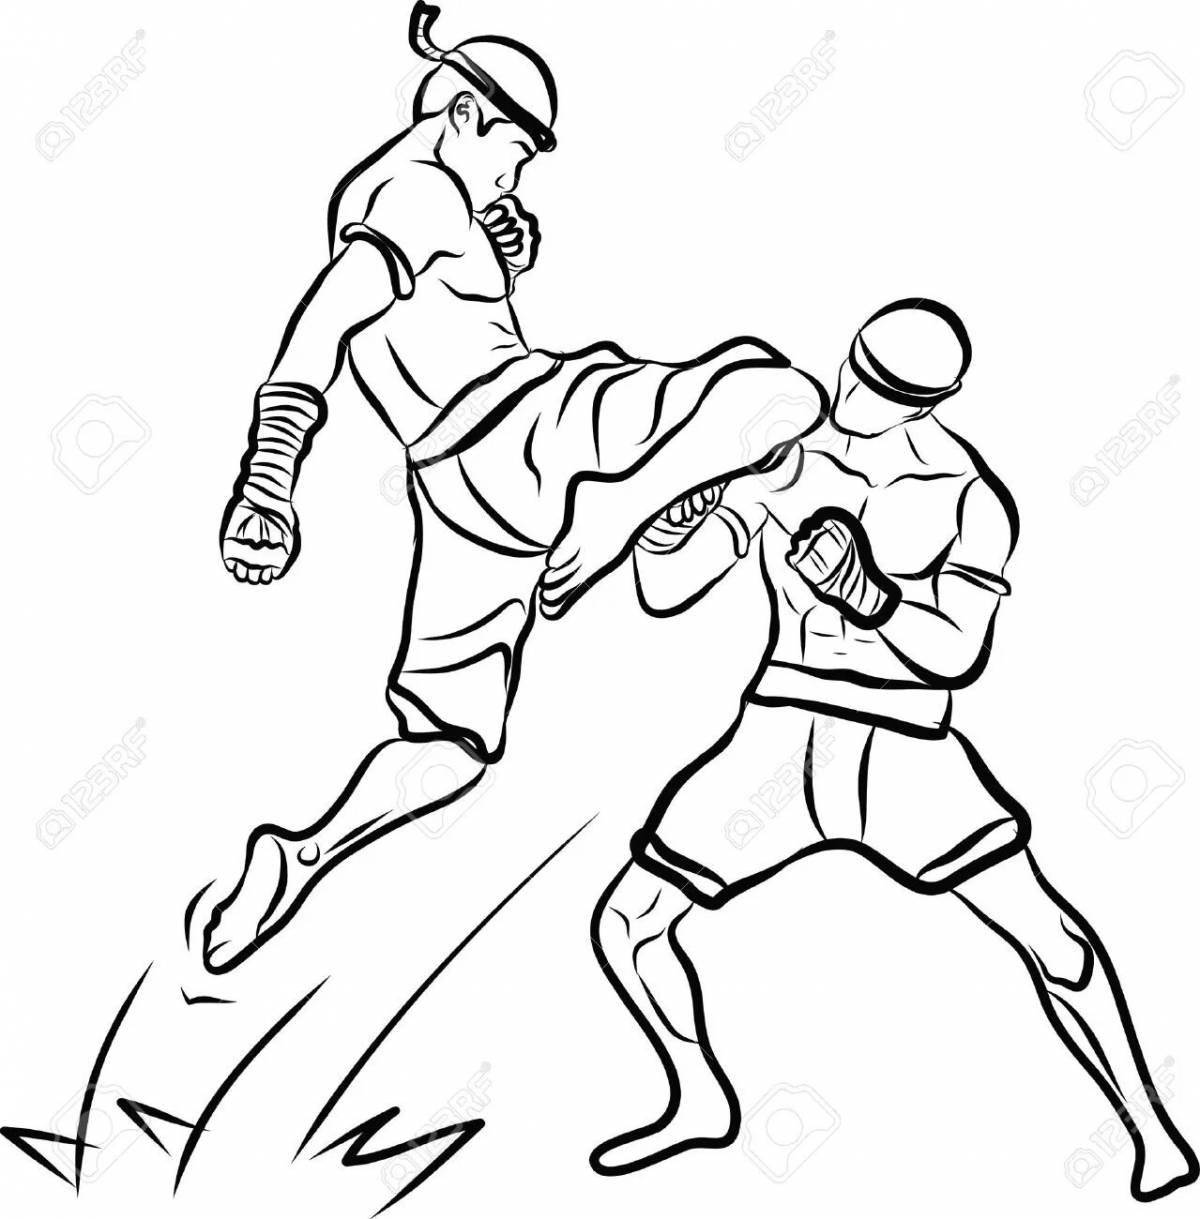 Coloring page cheeky kickboxing